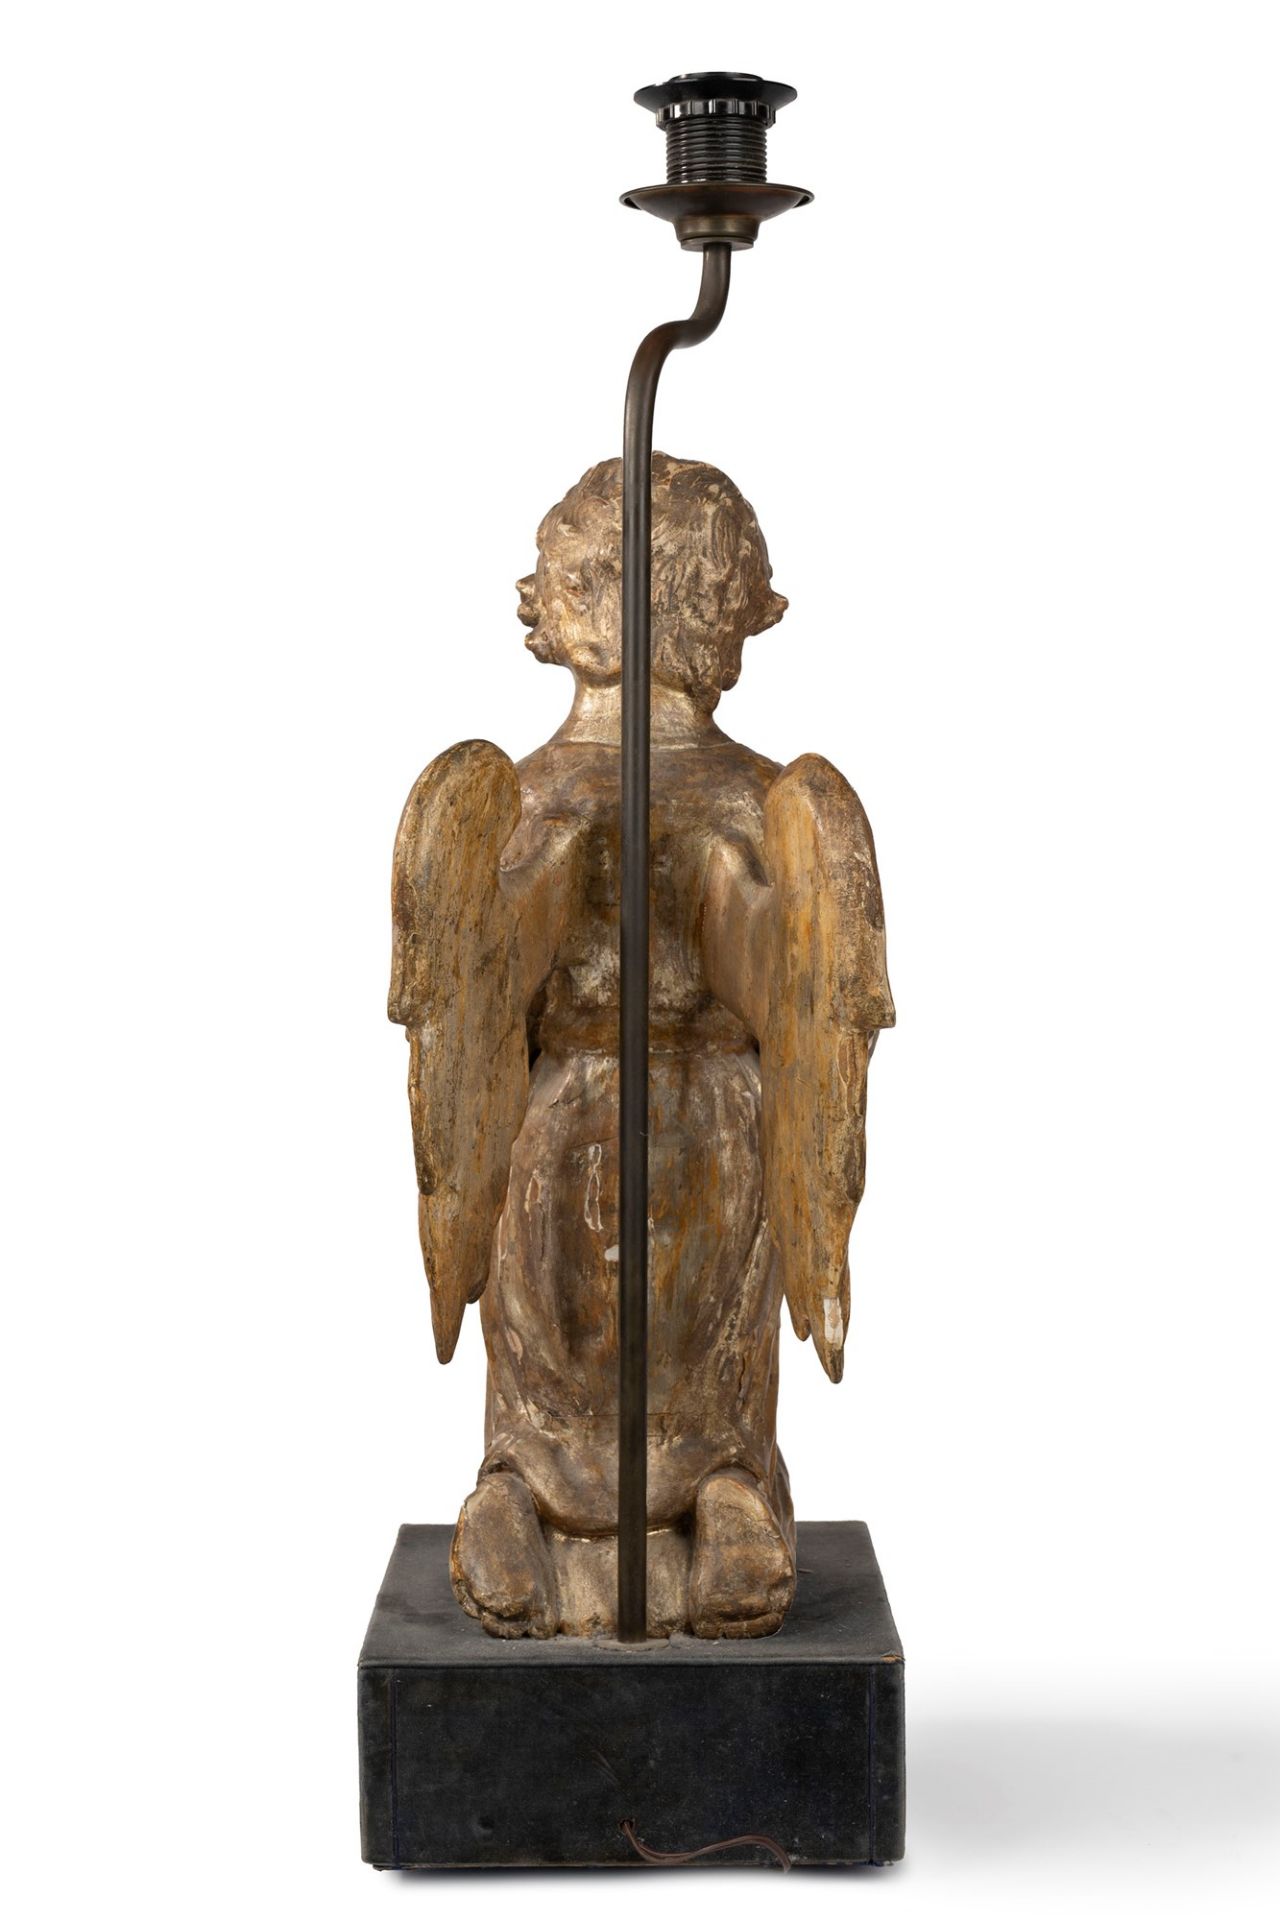 Praying angel in mecca-gilded wood mounted on a lamp, 18th-19th centuries - Image 2 of 3